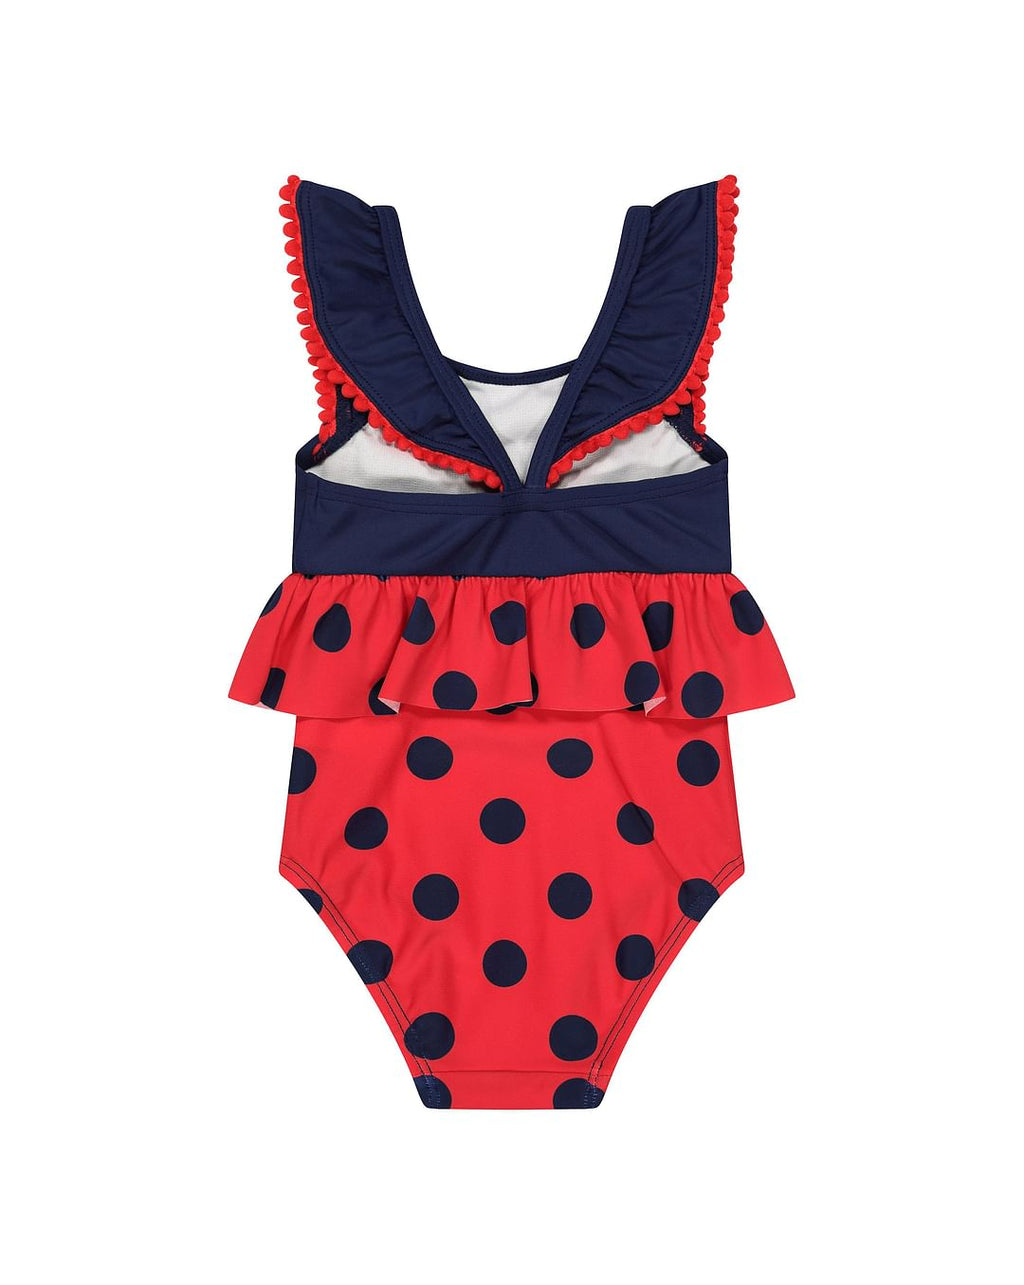 swimming costumes for girls online india 